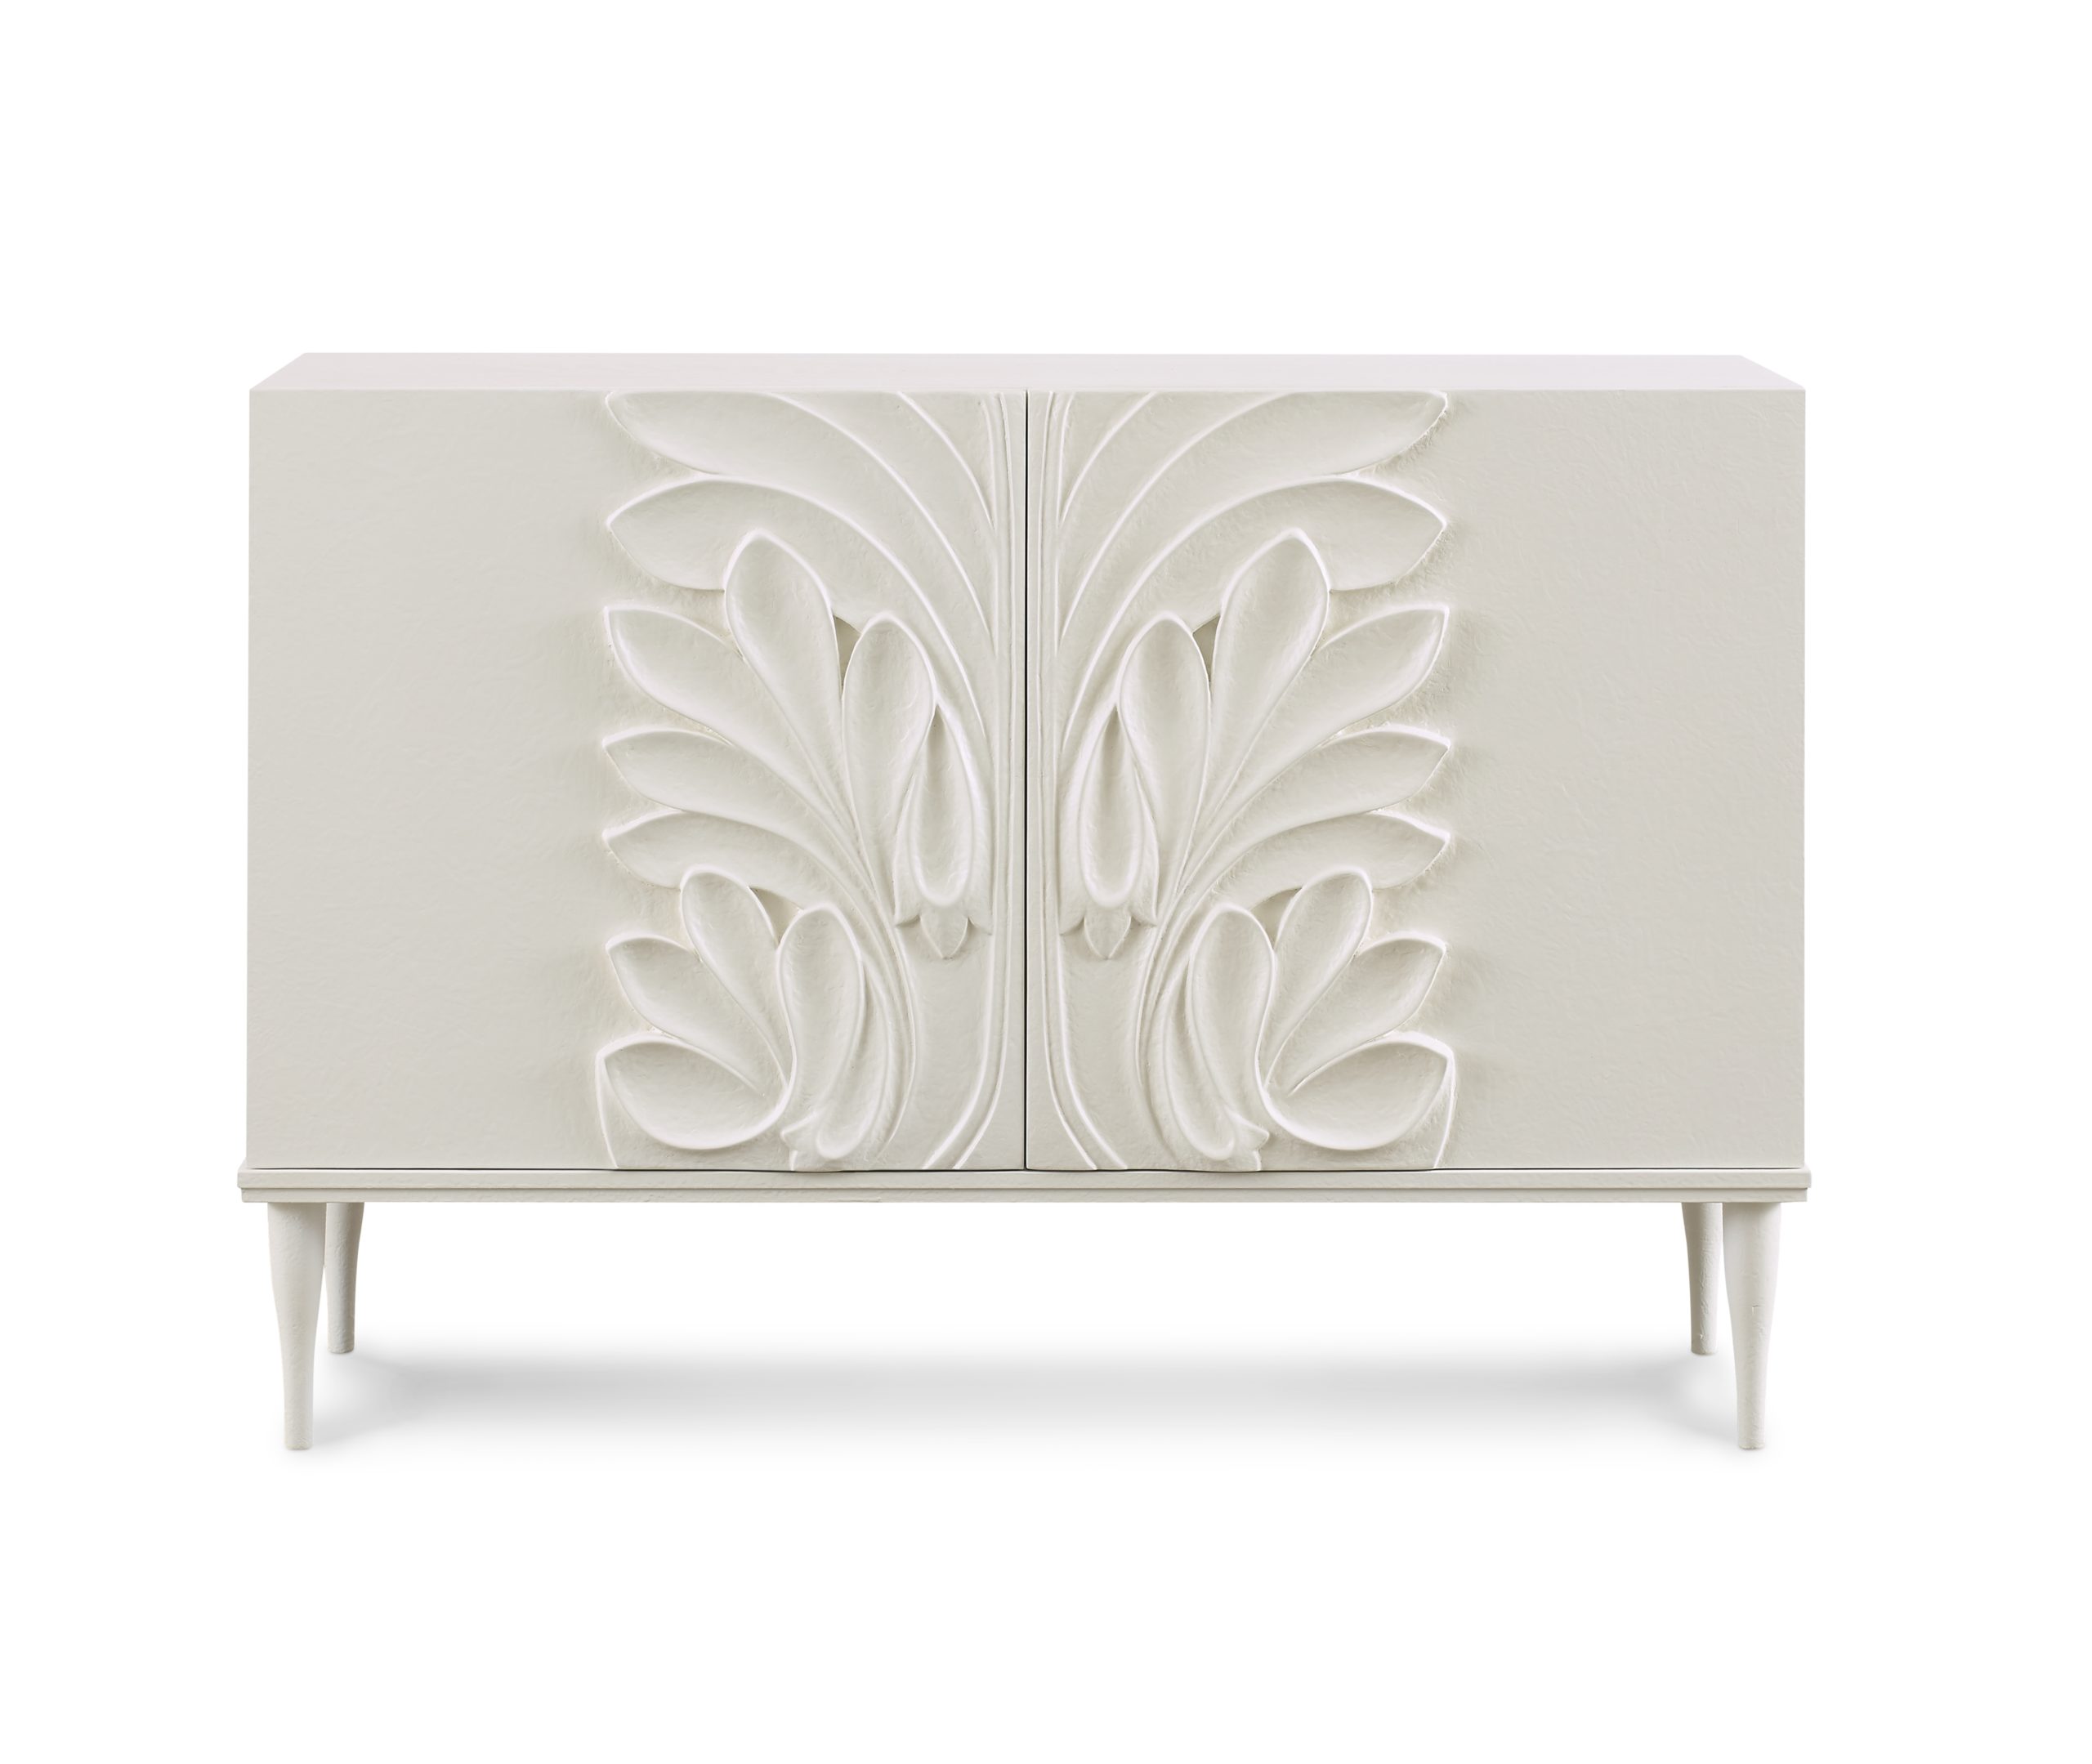 Baker_products_WNWN_jardin_chest_BAA3229_FRONT-scaled-2